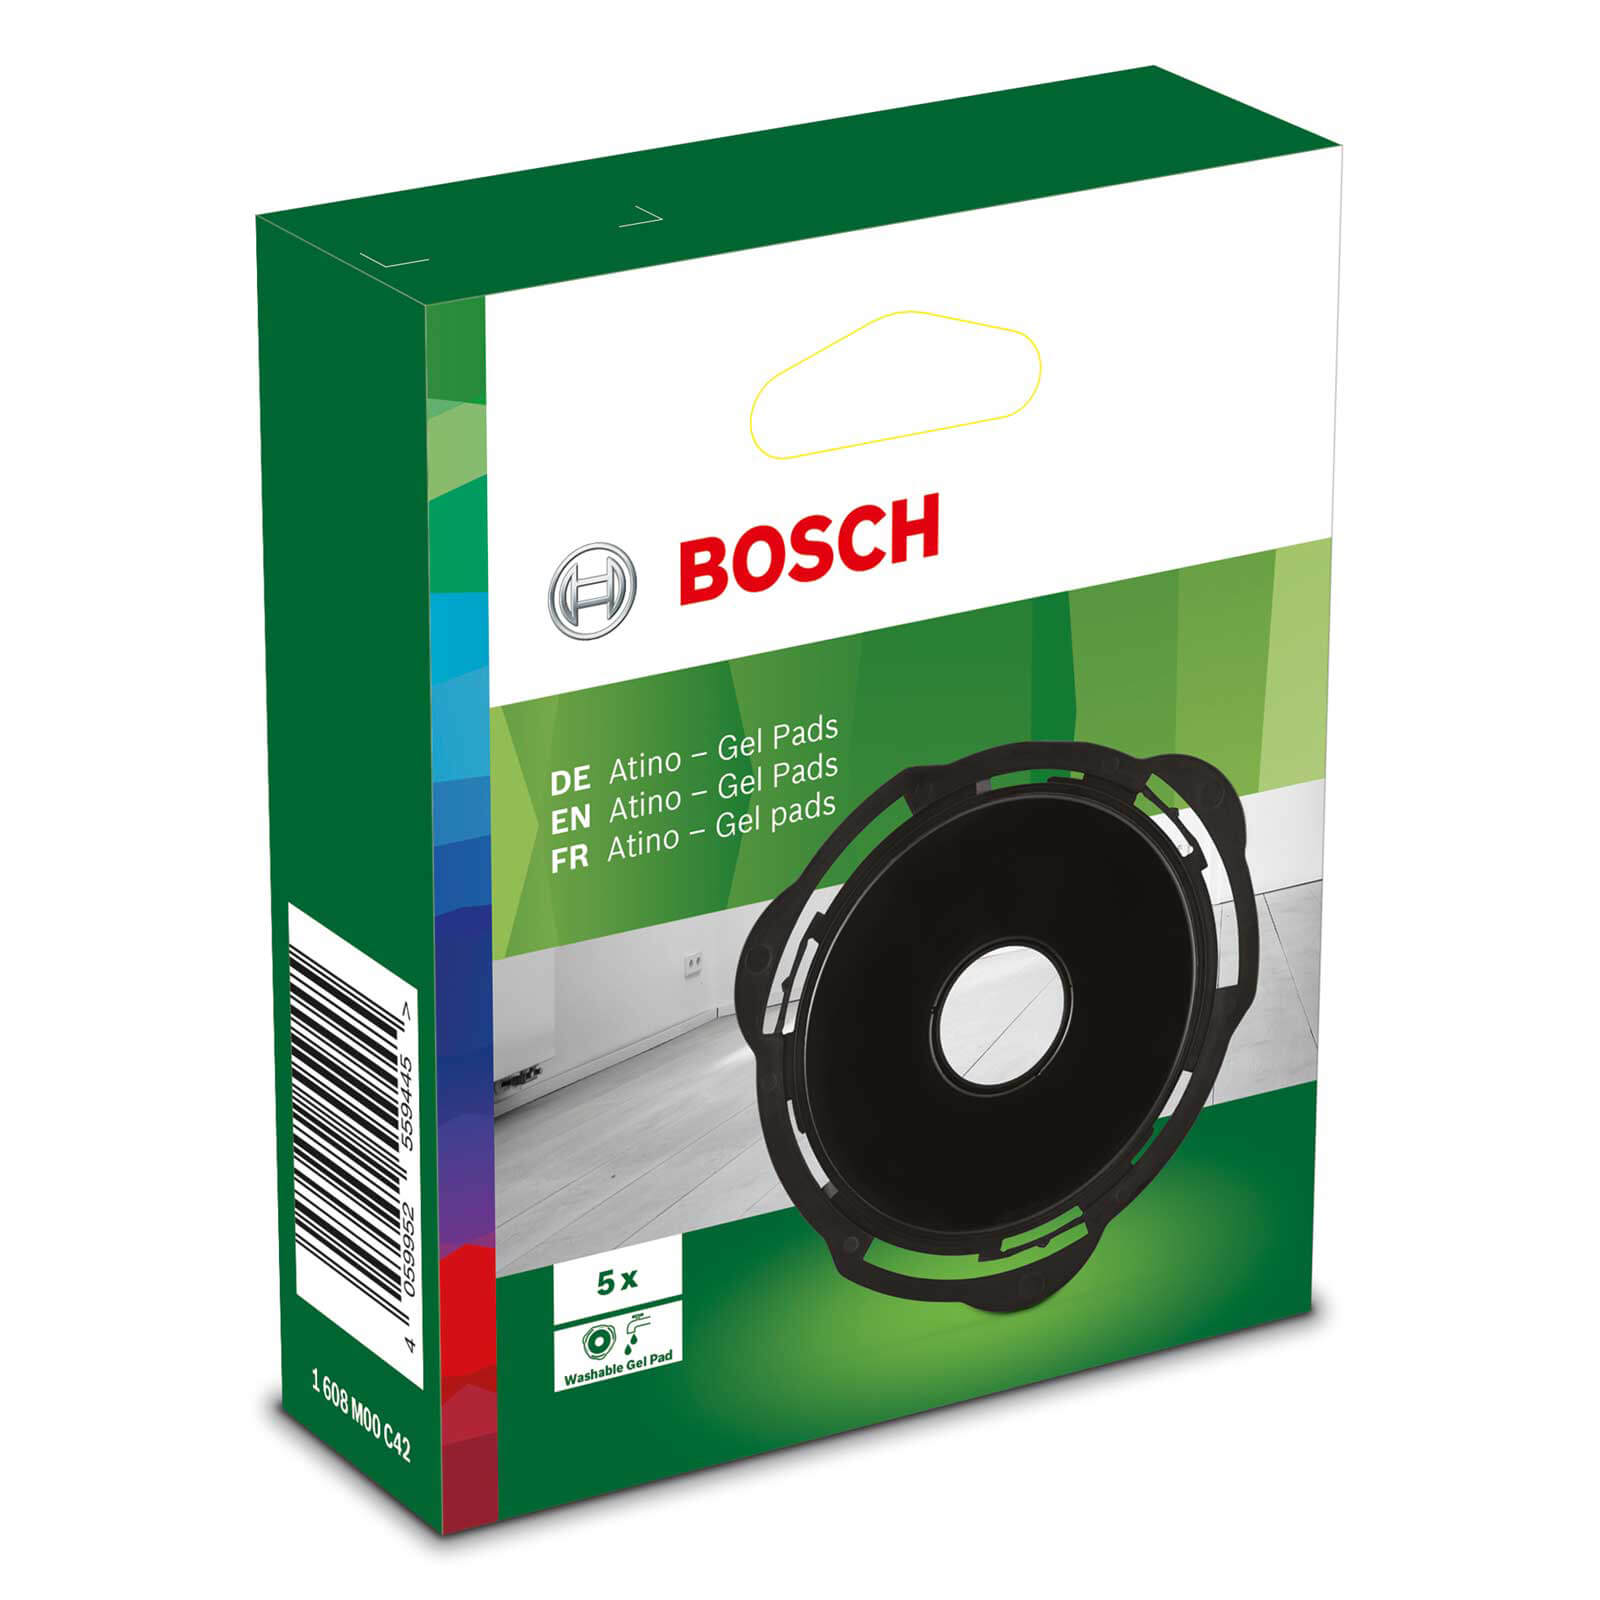 Photo of Bosch Atino Gel Pads Pack Of 5